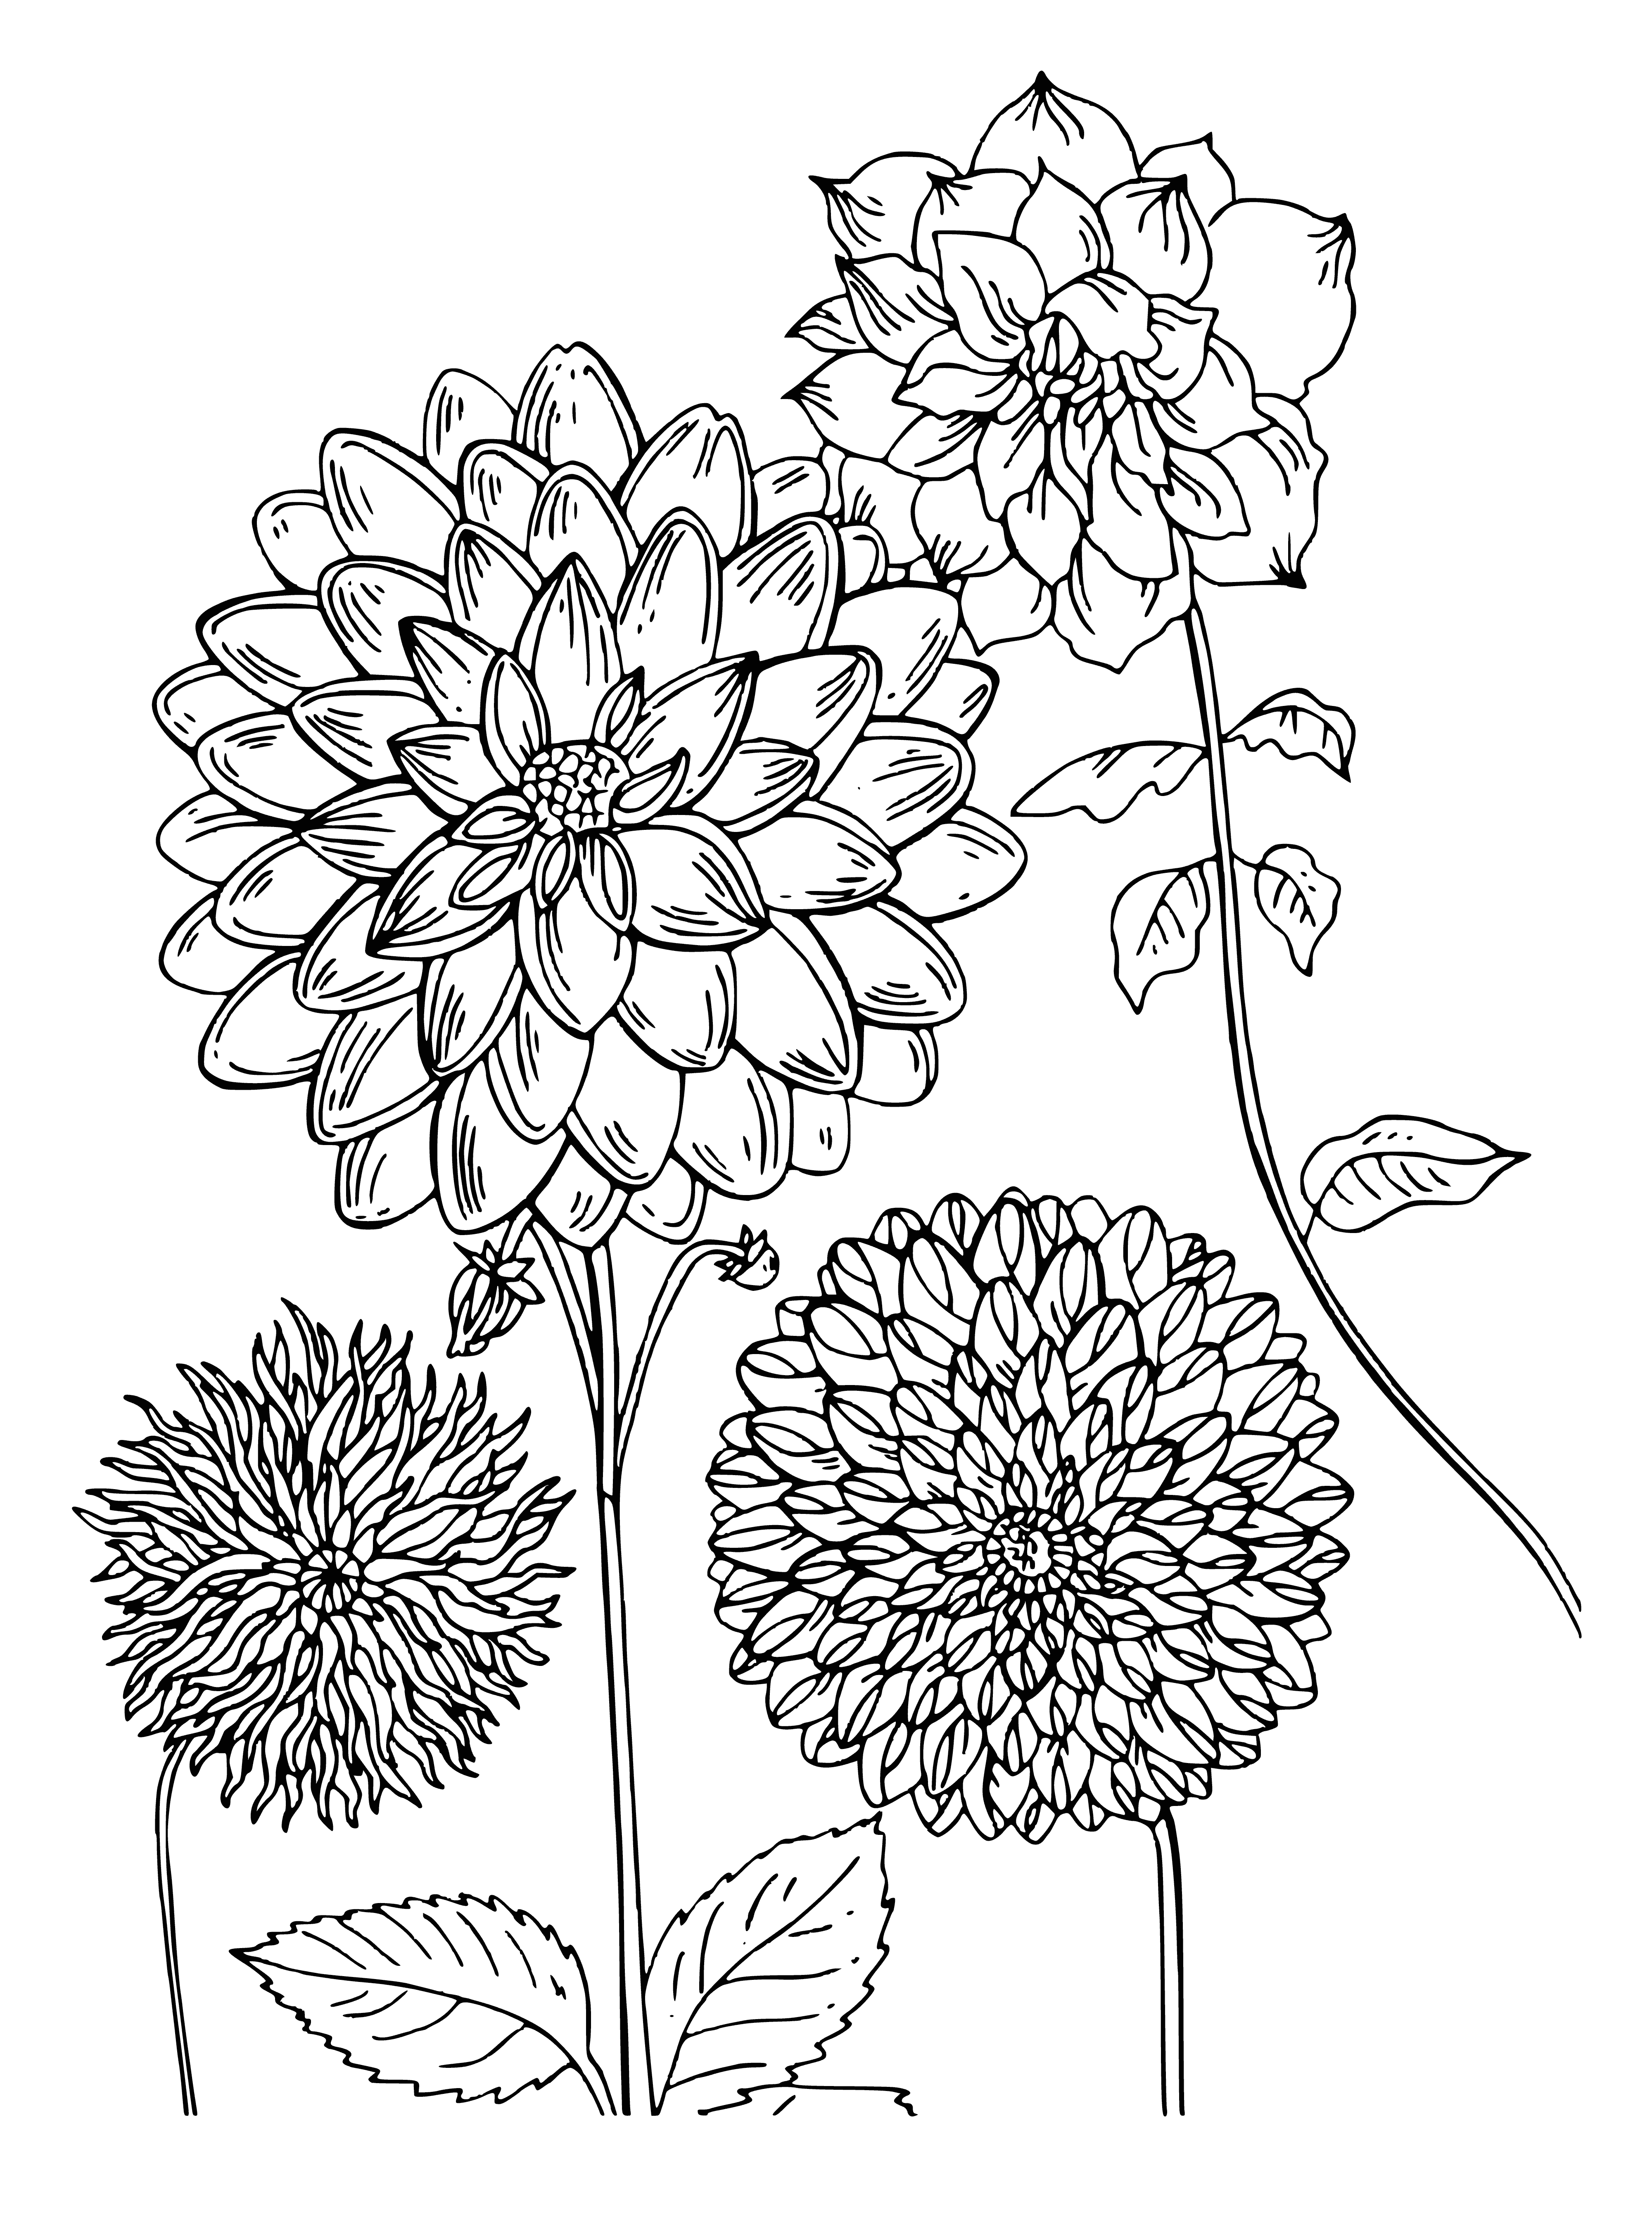 coloring page: Colorful dahlias have large blooms and thin stems, with small petals in the center and narrow green leaves.